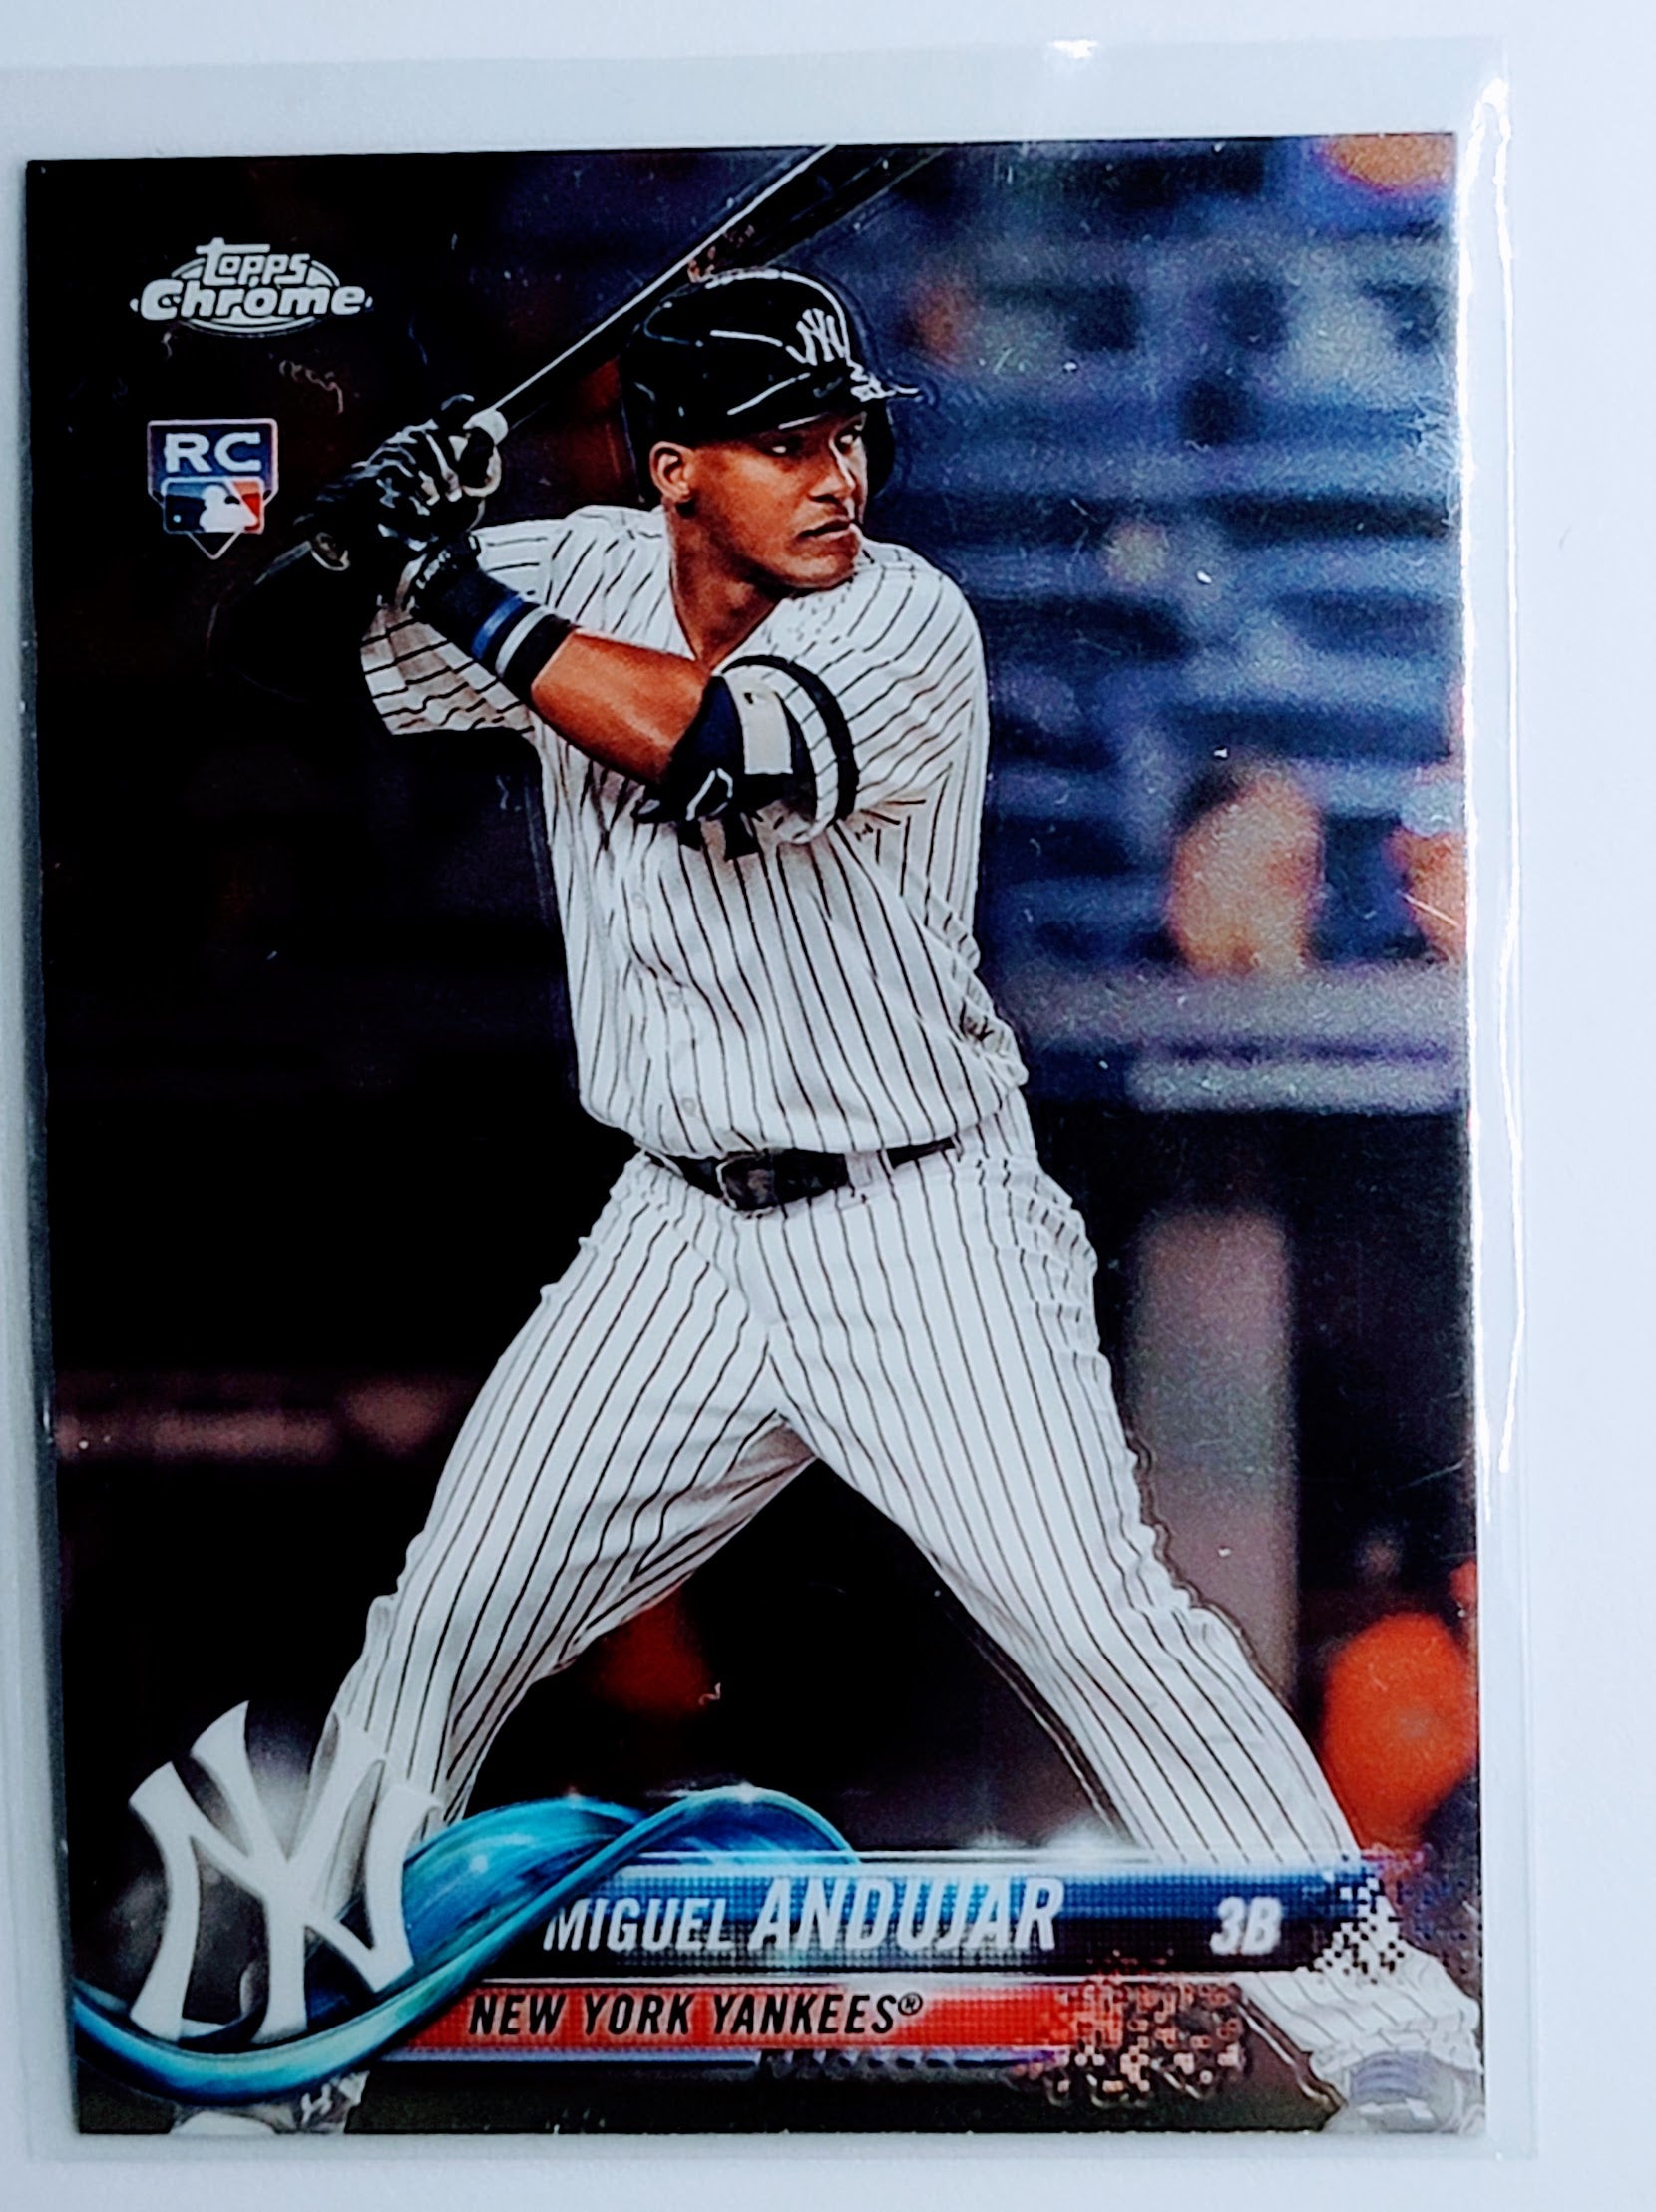 2018 Topps Chrome Miguel
  Andujar   RC New York Yankees Baseball
  Card  TH1CB_1e simple Xclusive Collectibles   